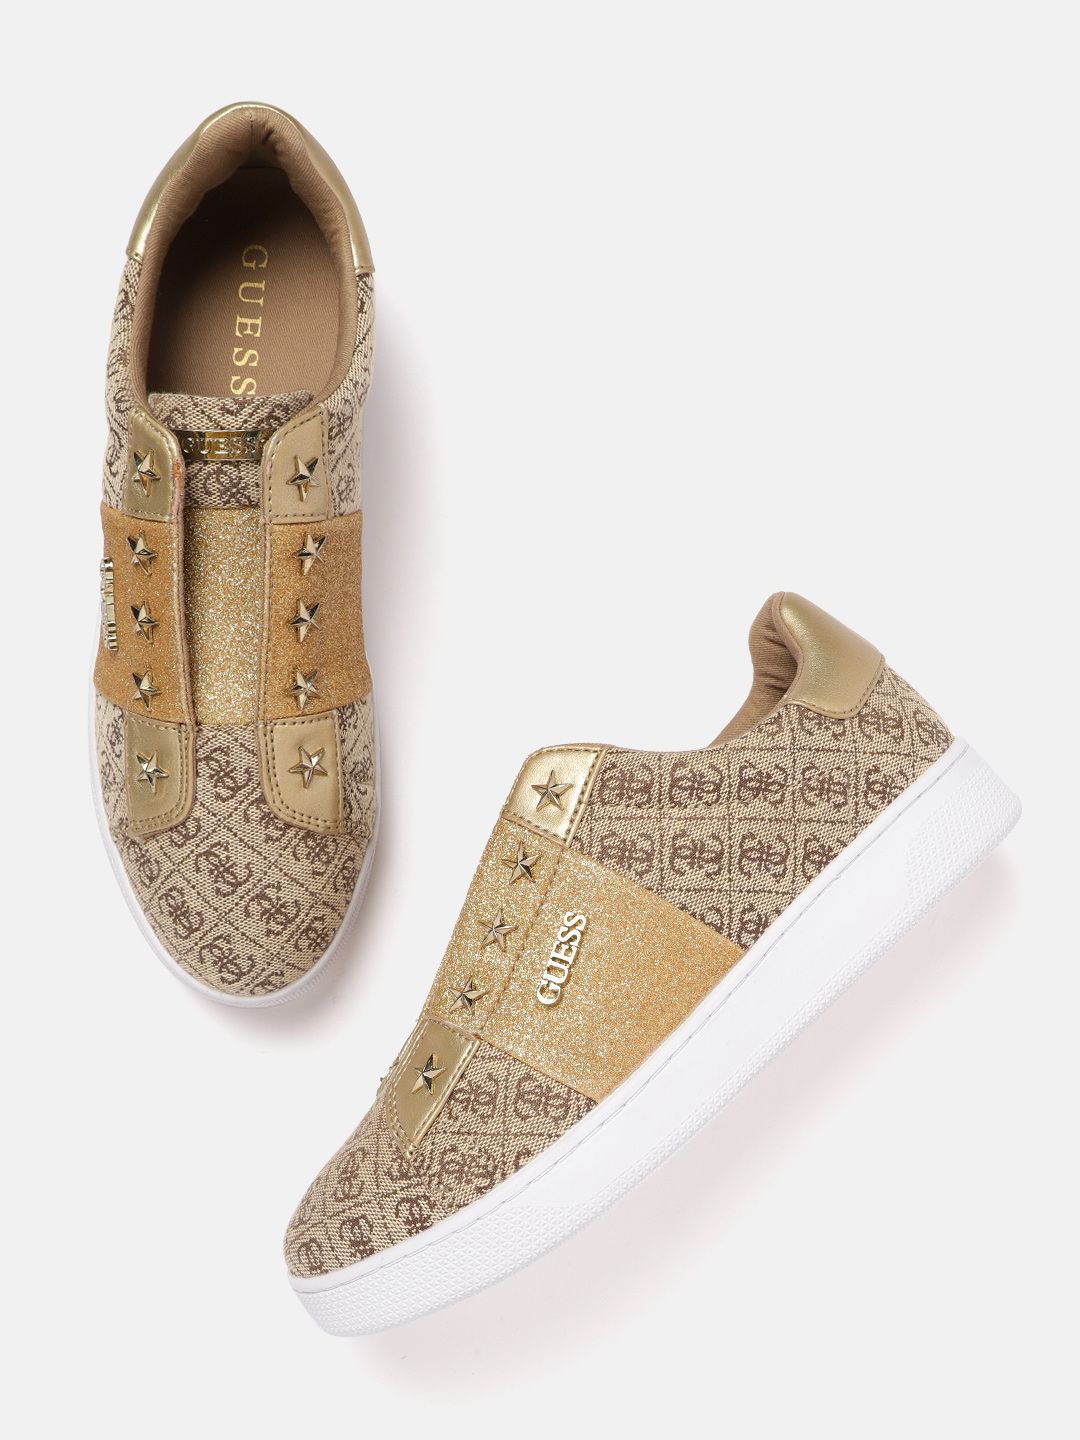 GUESS Women Beige Woven Design PU Slip-On Sneakers Price in India